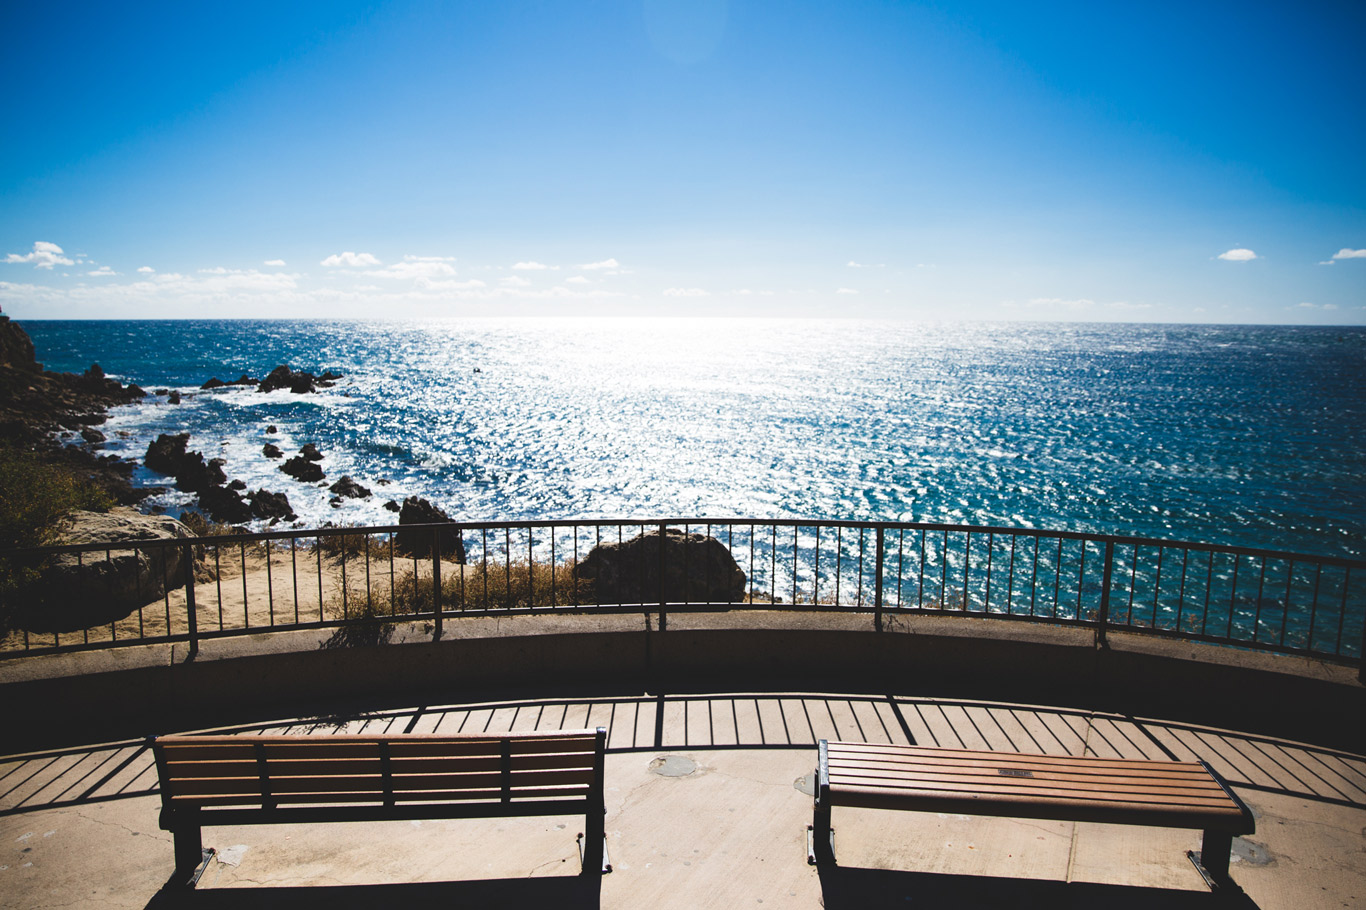 Scenic view of two benches overlooking the ocean and a blue sky.